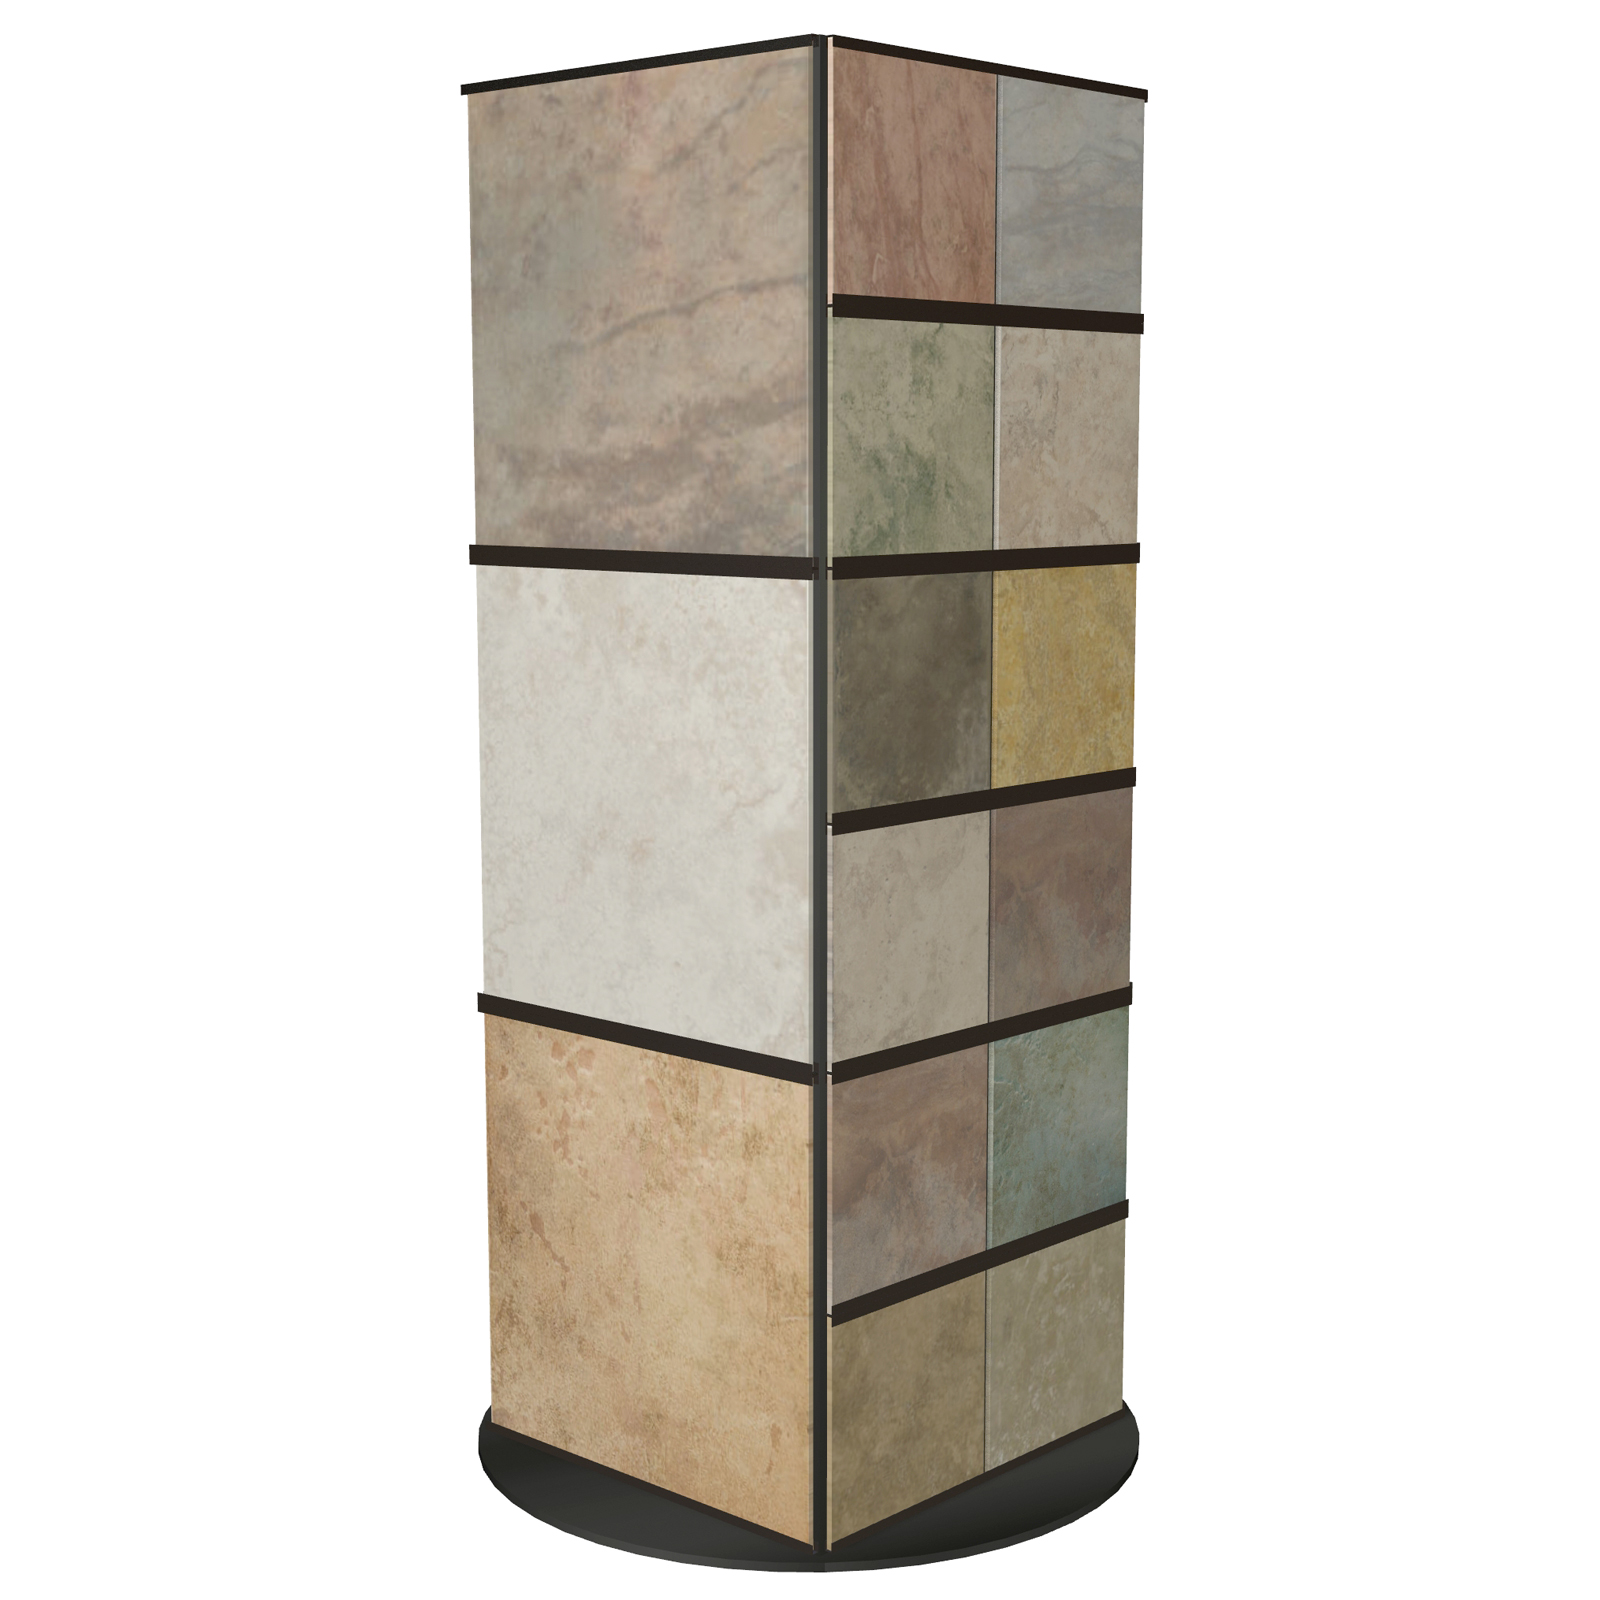 Highly Customizable CD10 Tower Displaying Large Tile Stone Marble or Quartz Samples the Rotating Base Helps Maximize Showroom Floor Space